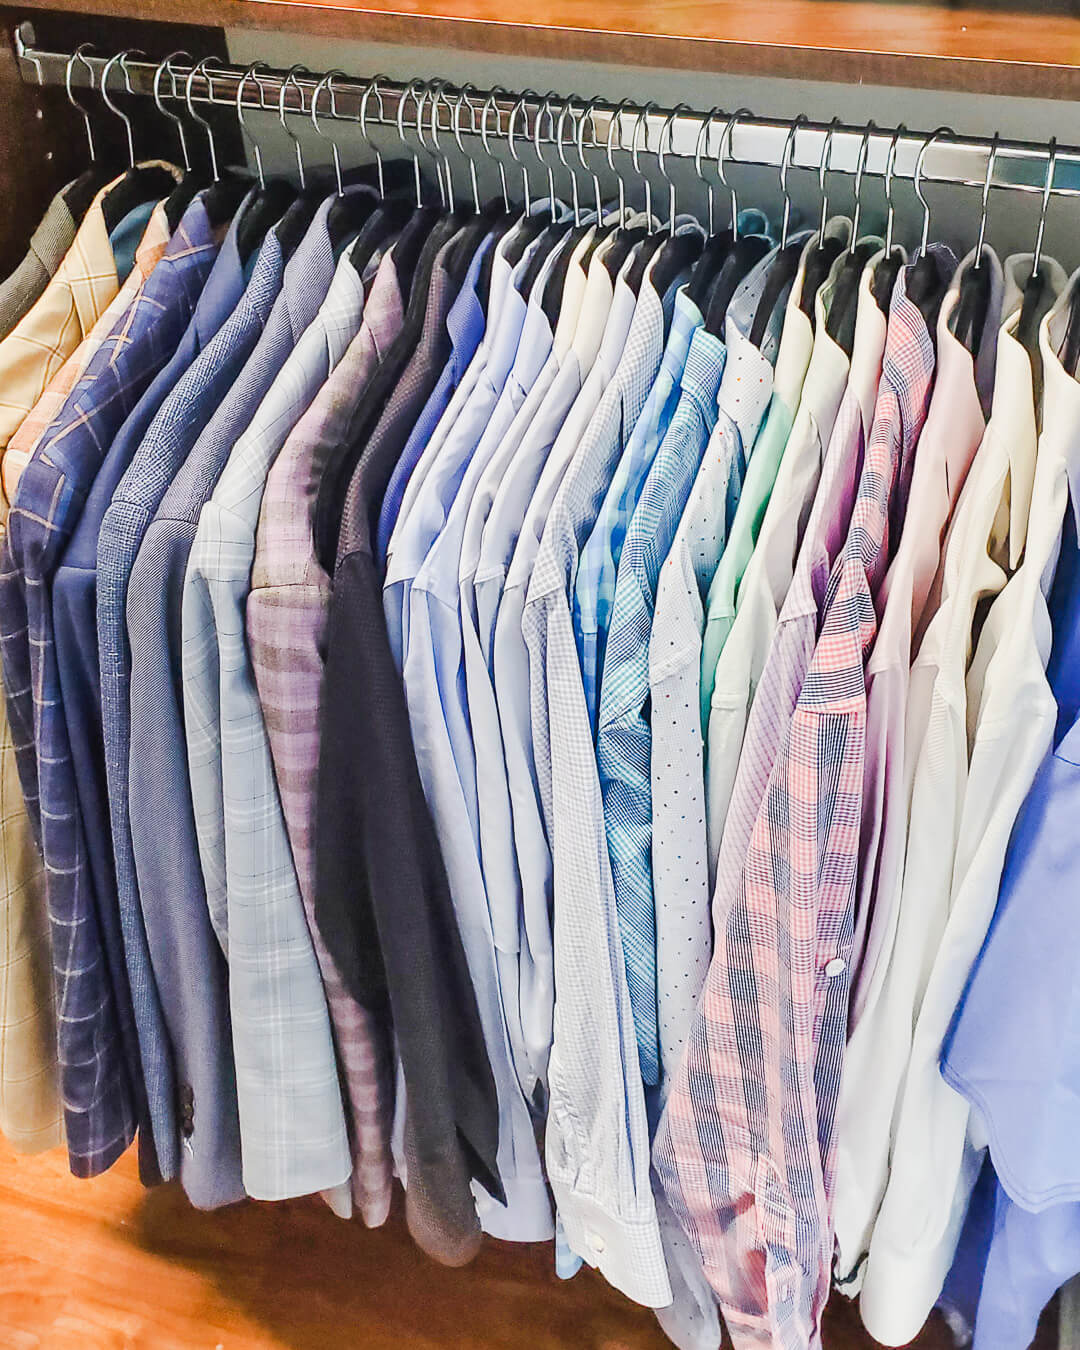 Men's dress shirts organized in color order